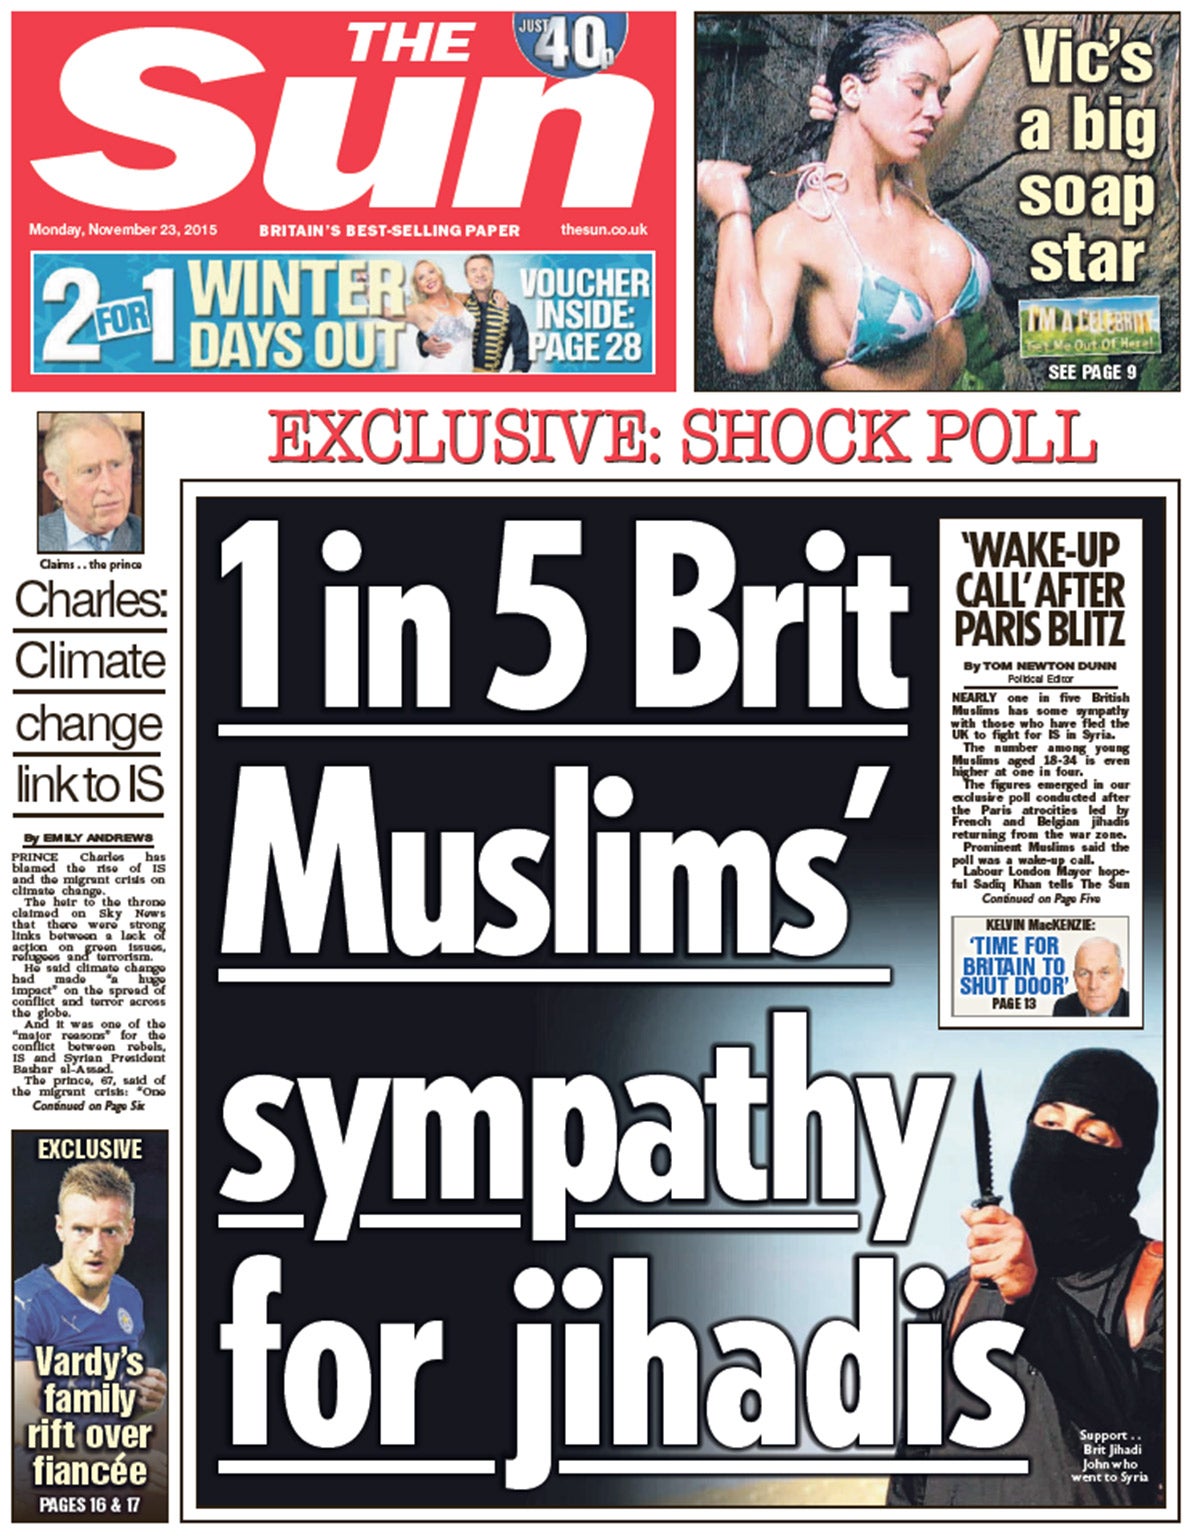 Monday's controversial front page of The Sun